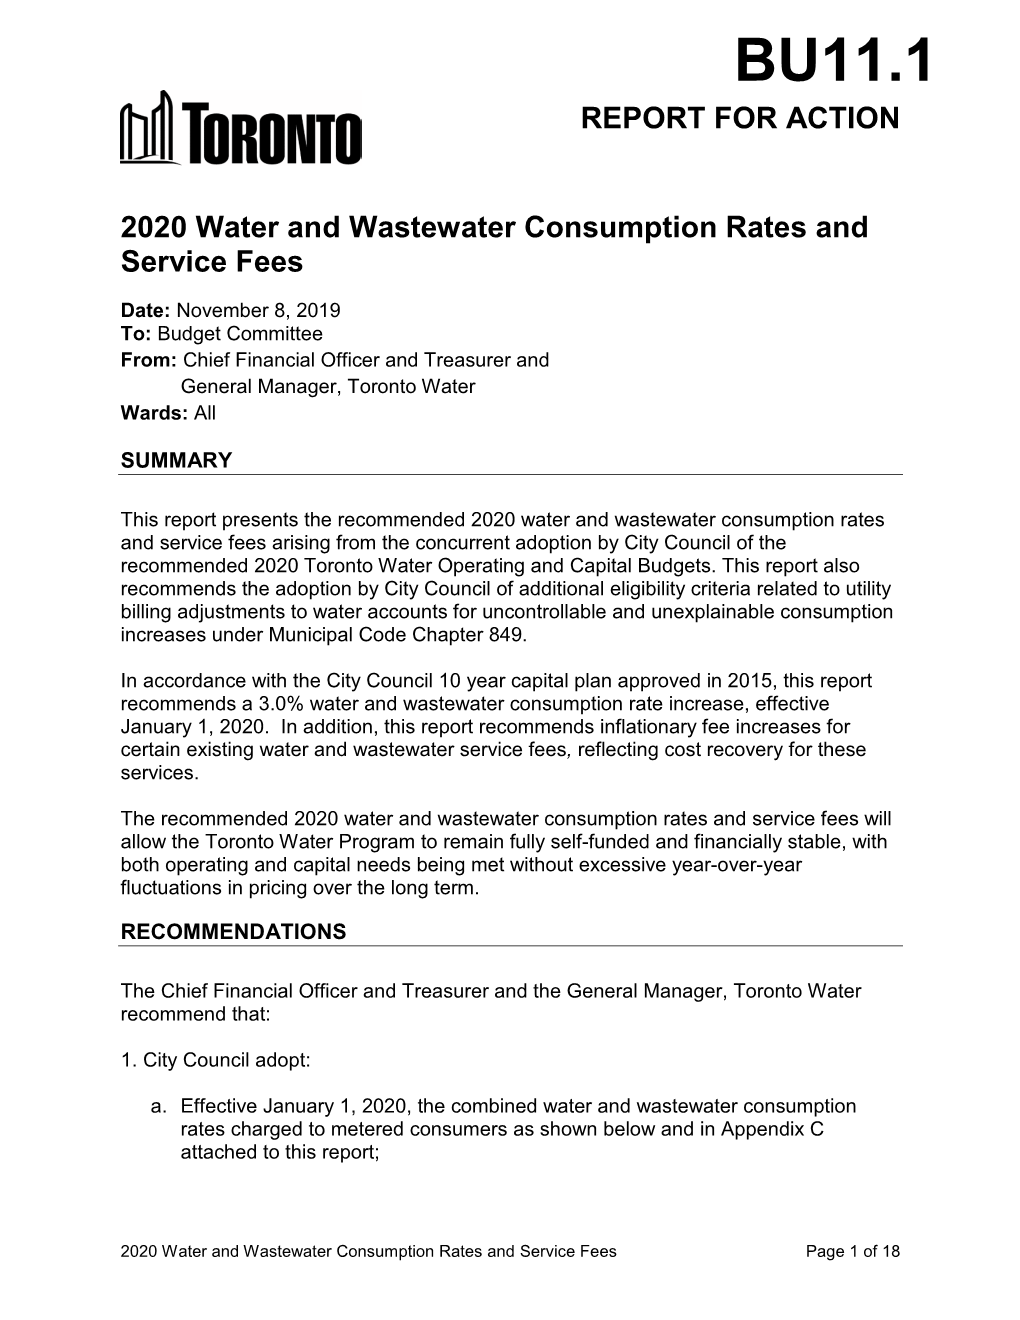 2020 Water and Wastewater Consumption Rates and Service Fees